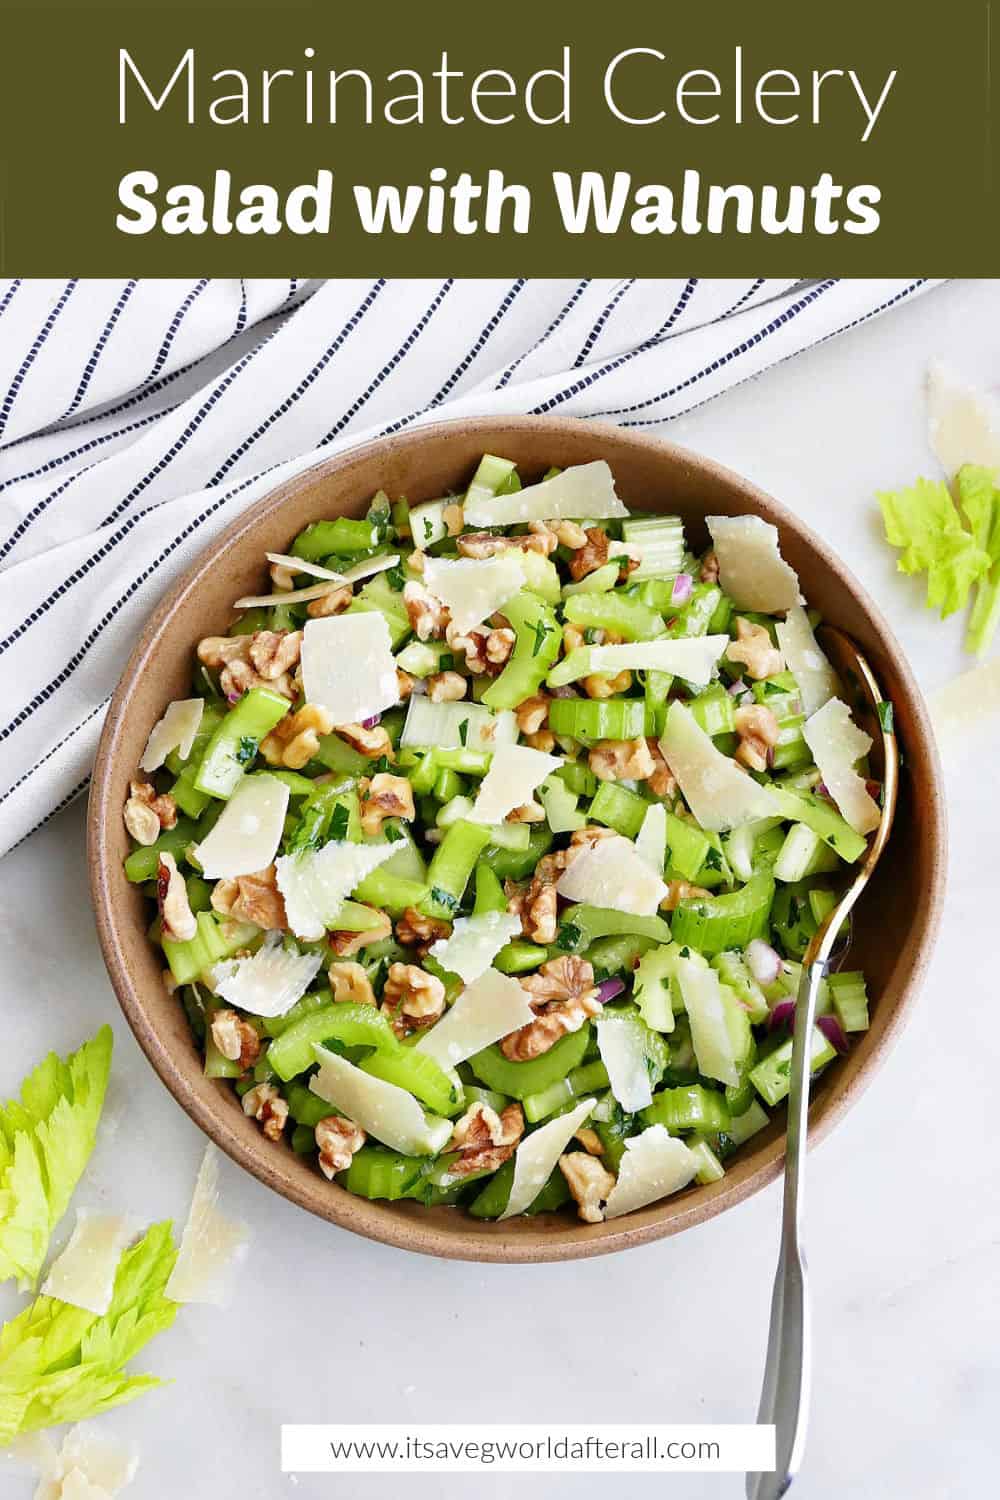 Marinated Celery Salad with Walnuts - It's a Veg World After All®